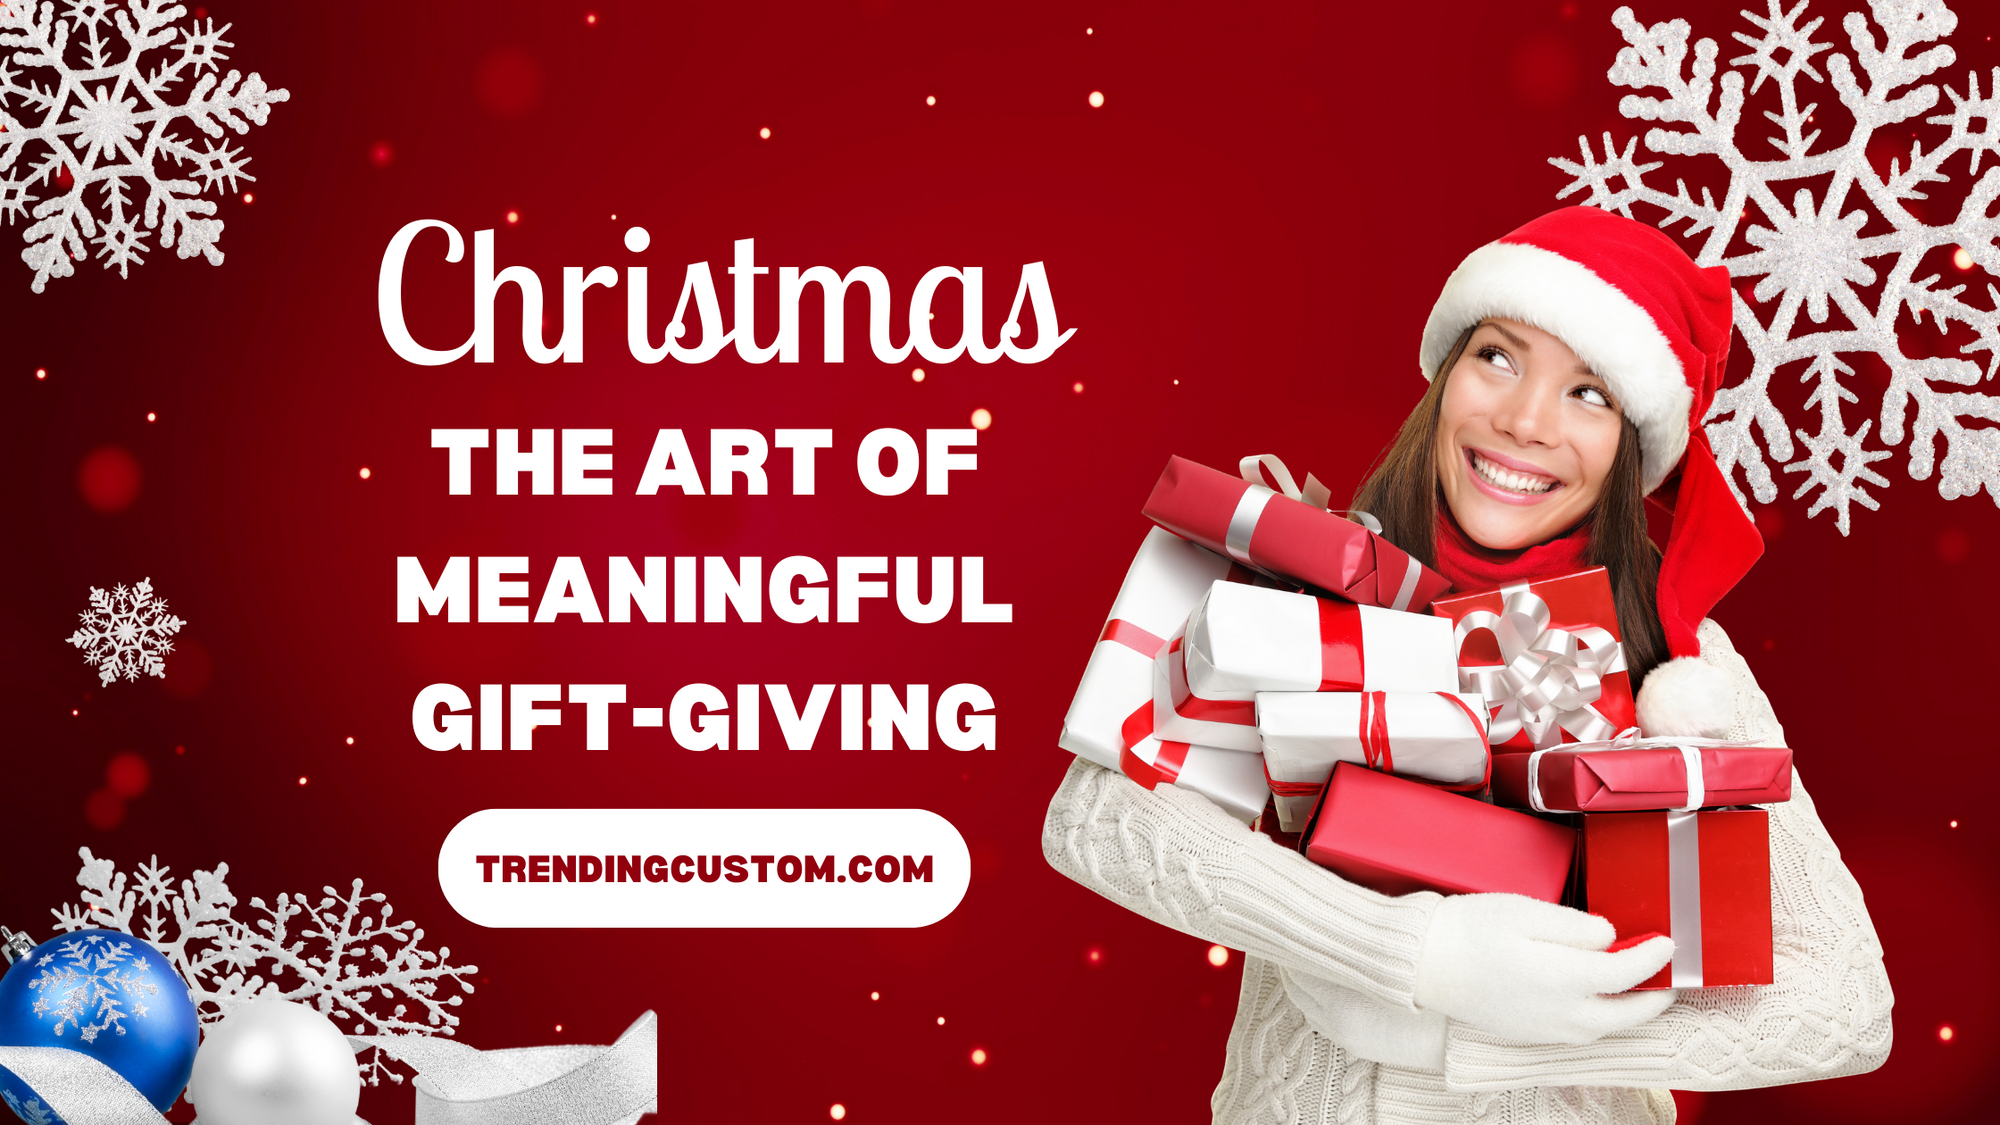 The Art of Meaningful Gift-Giving: Celebrating Christmas with Heart